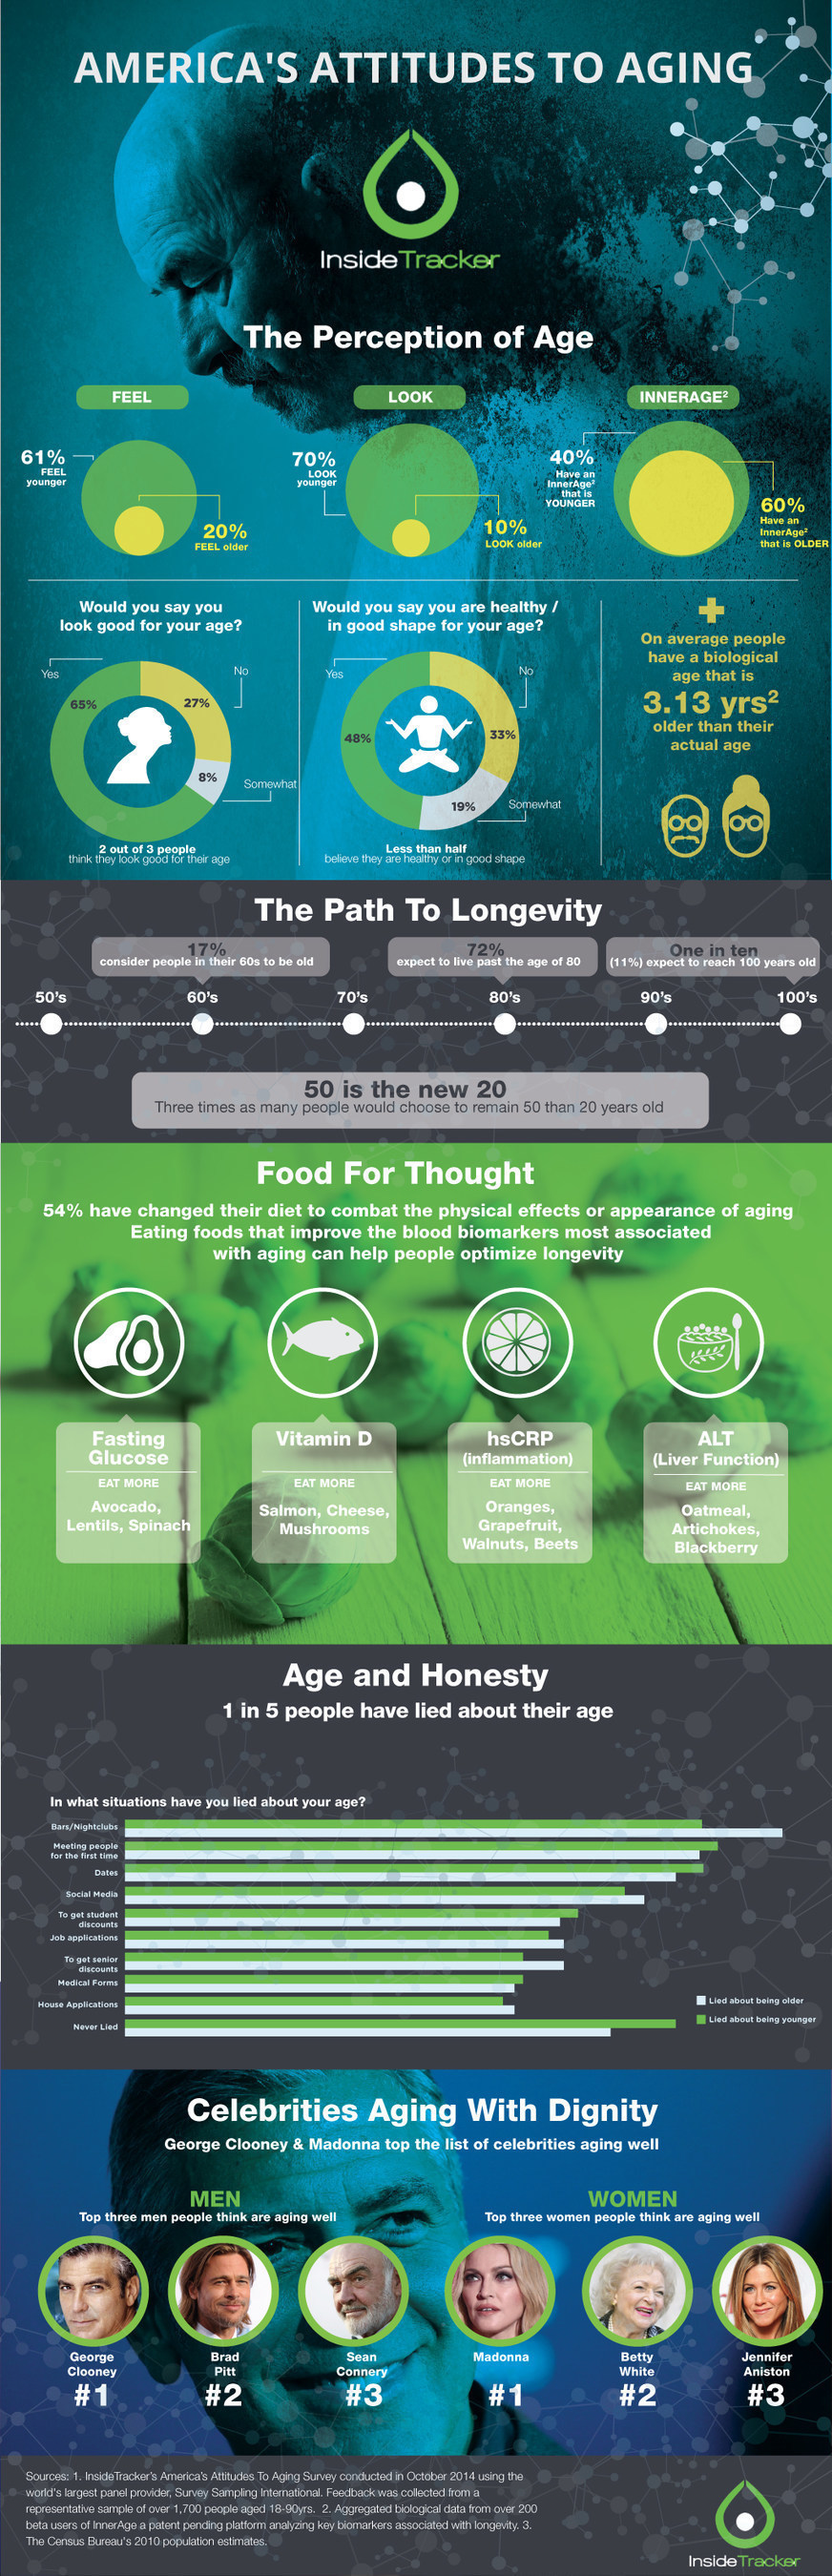 InnerAge from InsideTracker infographic on America's Attitudes to Aging